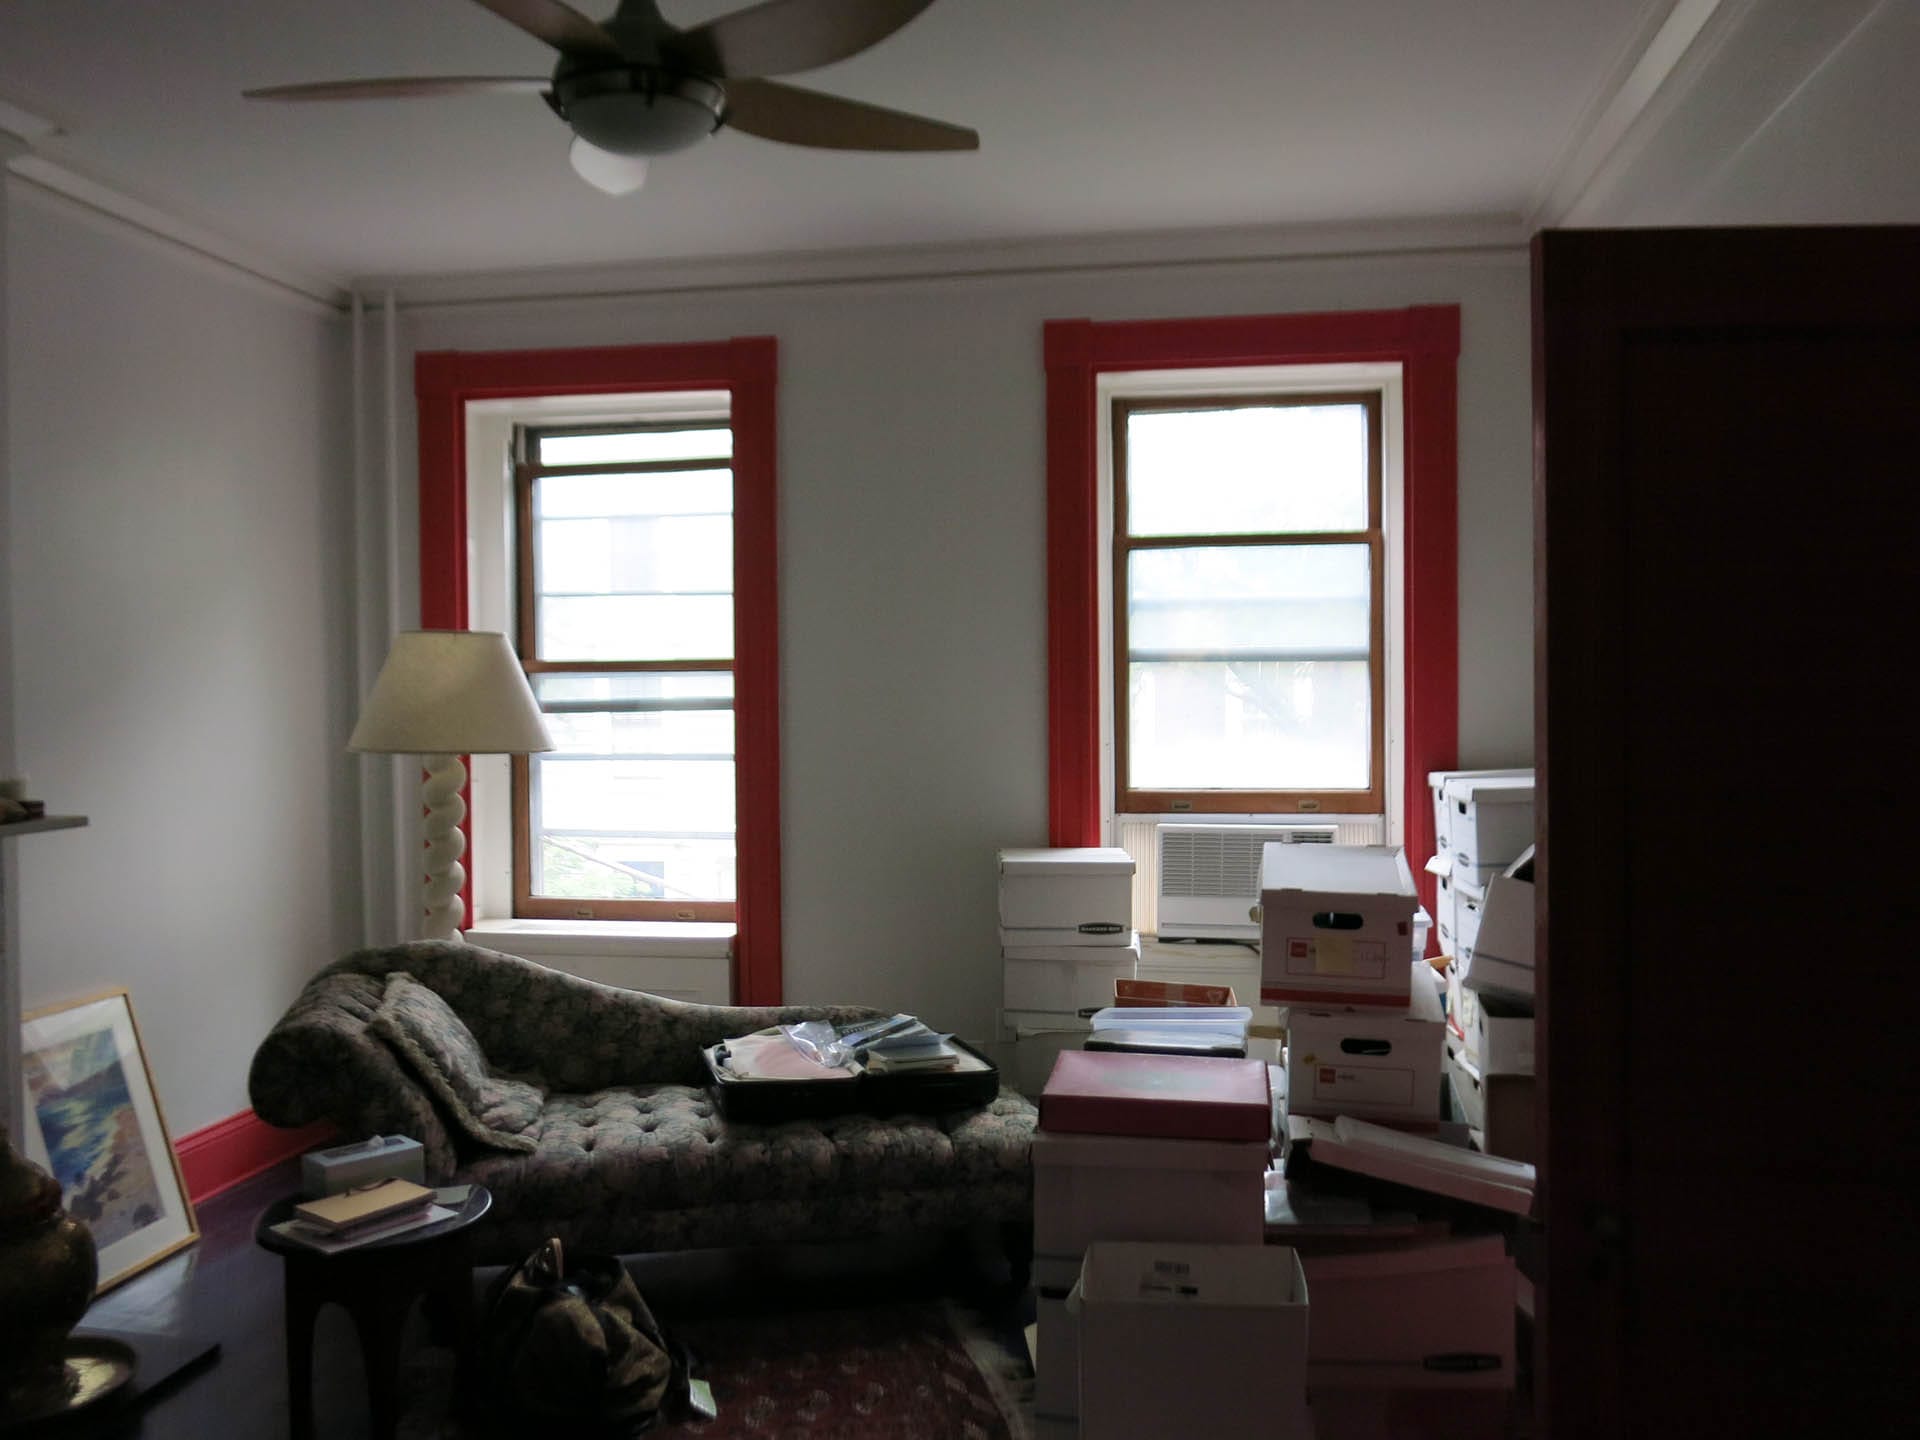 Primary bedroom before renovation with red trim around the windows and floors and white walls.